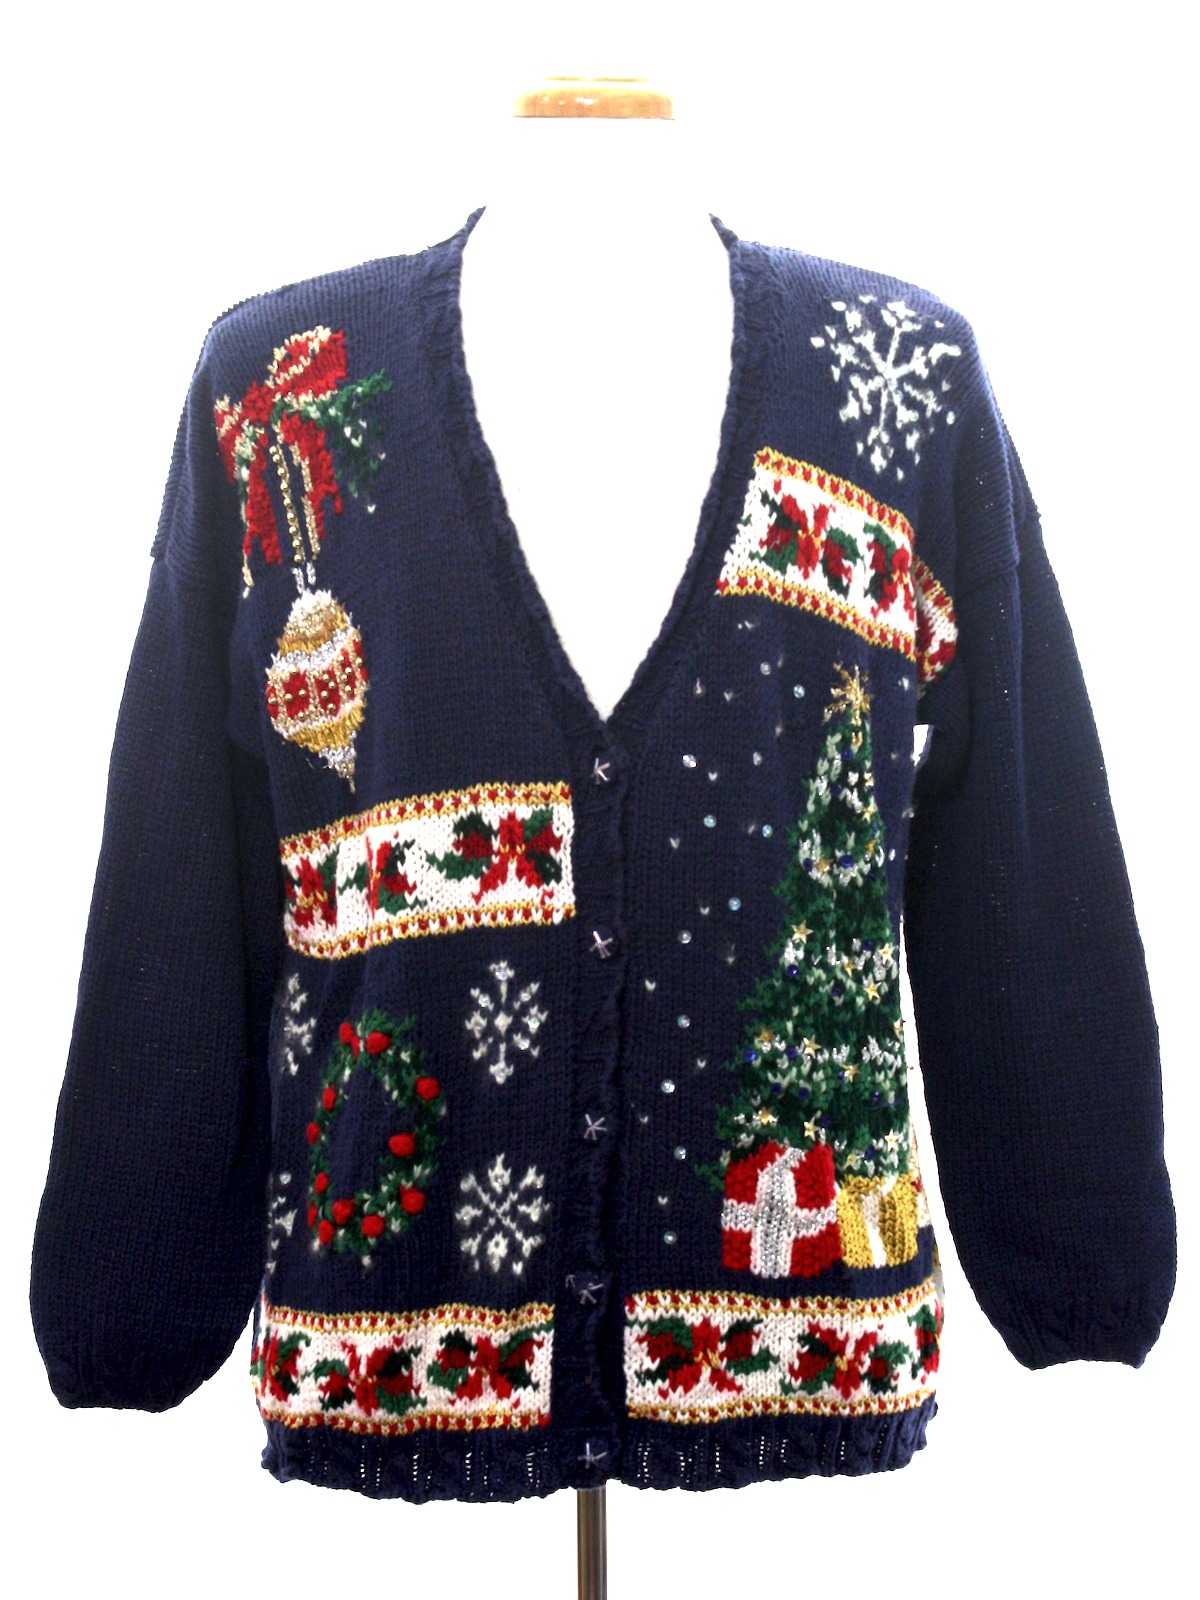 Nineties Ugly Christmas Cardigan Sweater: 90s authentic vintage ...